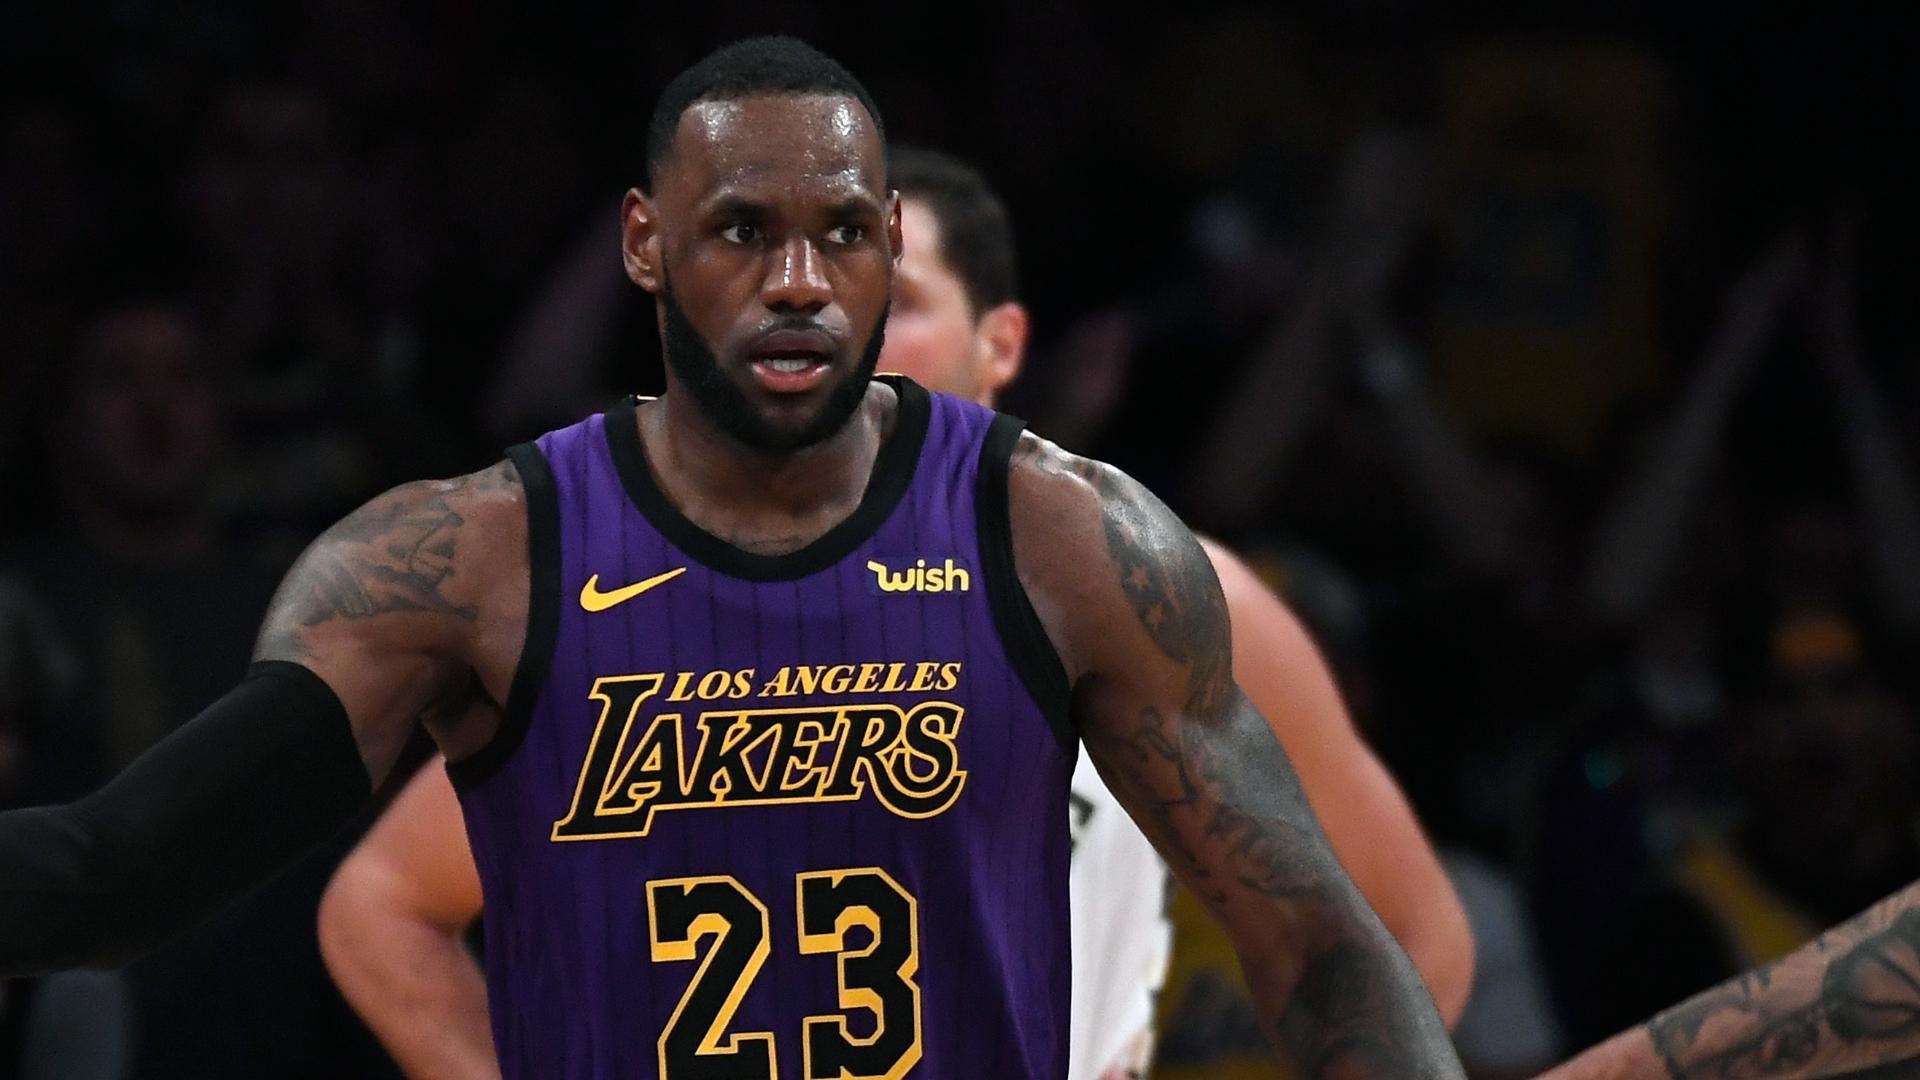 LeBron James Stats, News, Videos, Highlights, Pictures, Bio - Los Angeles Lakers - ESPN